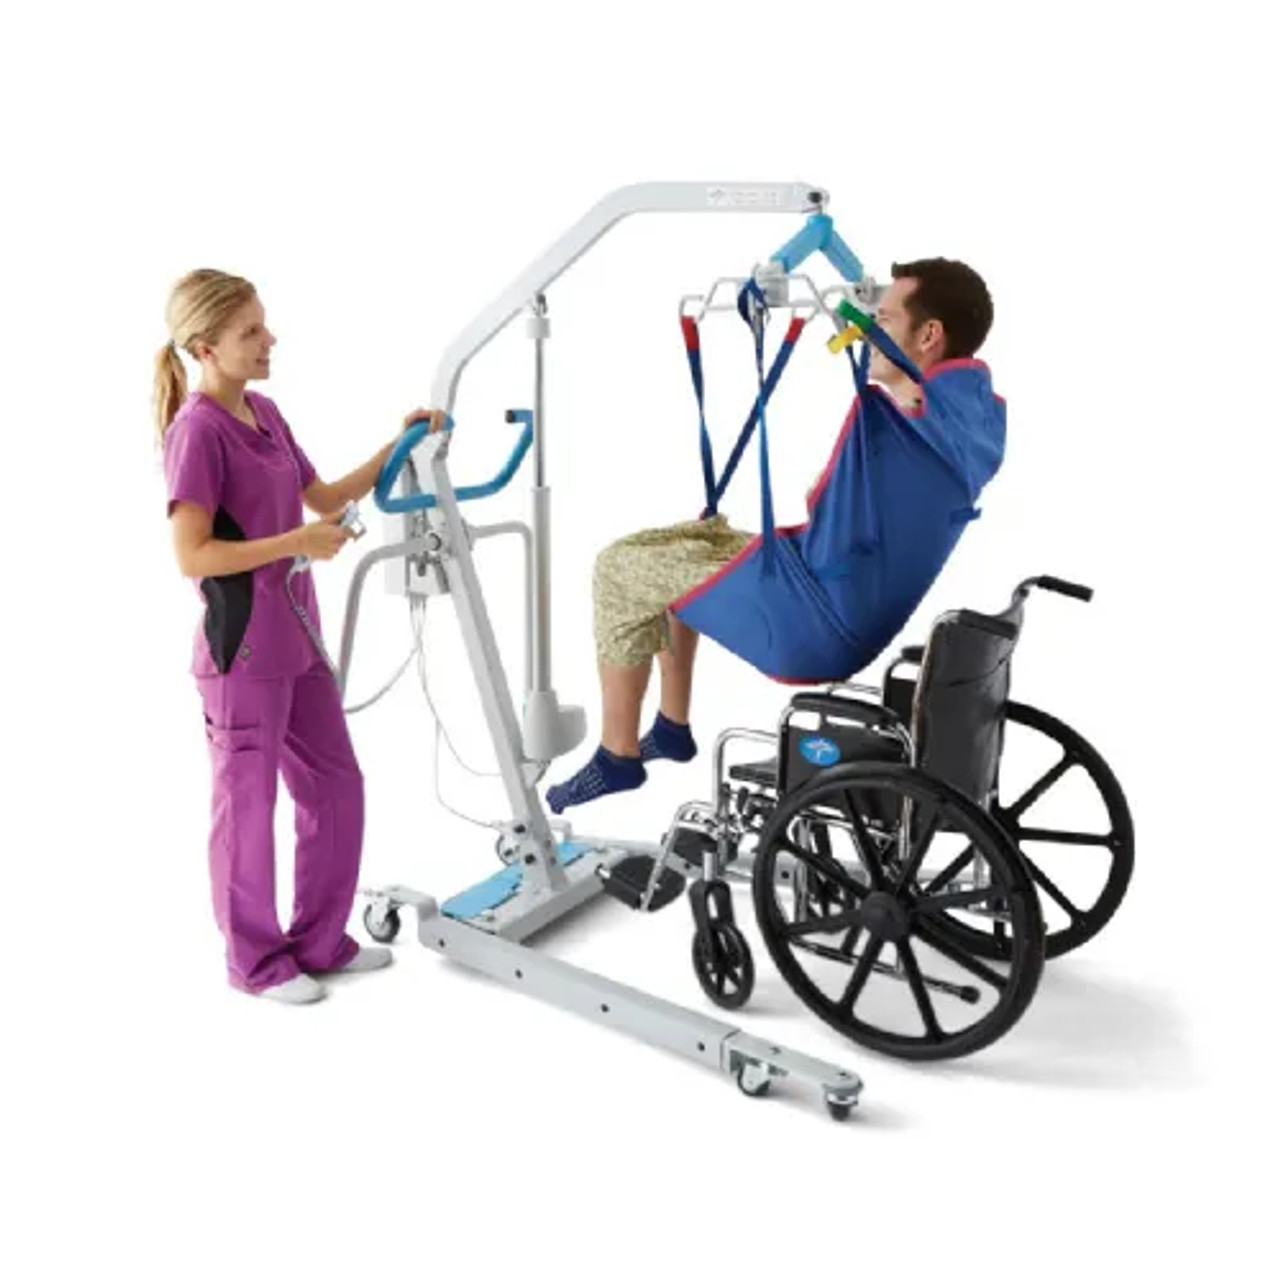 Medline Electric Hoyer Lift - Safe, Adjustable, and Powerful Patient Transfers-Chicken Pieces